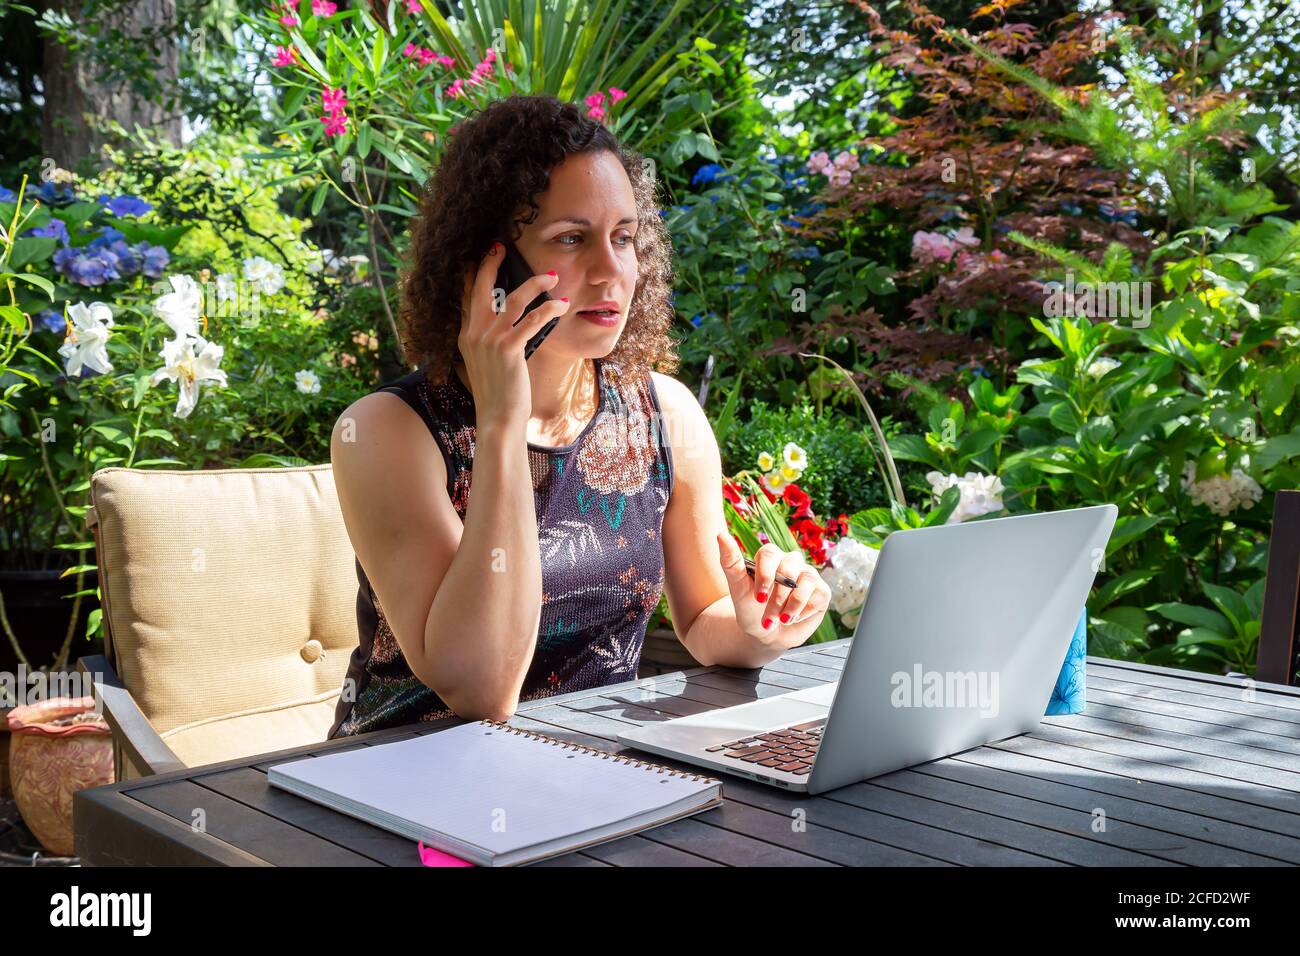 Young Caucasian Woman Working on a Laptop from Home in a Garden. Stock Photo